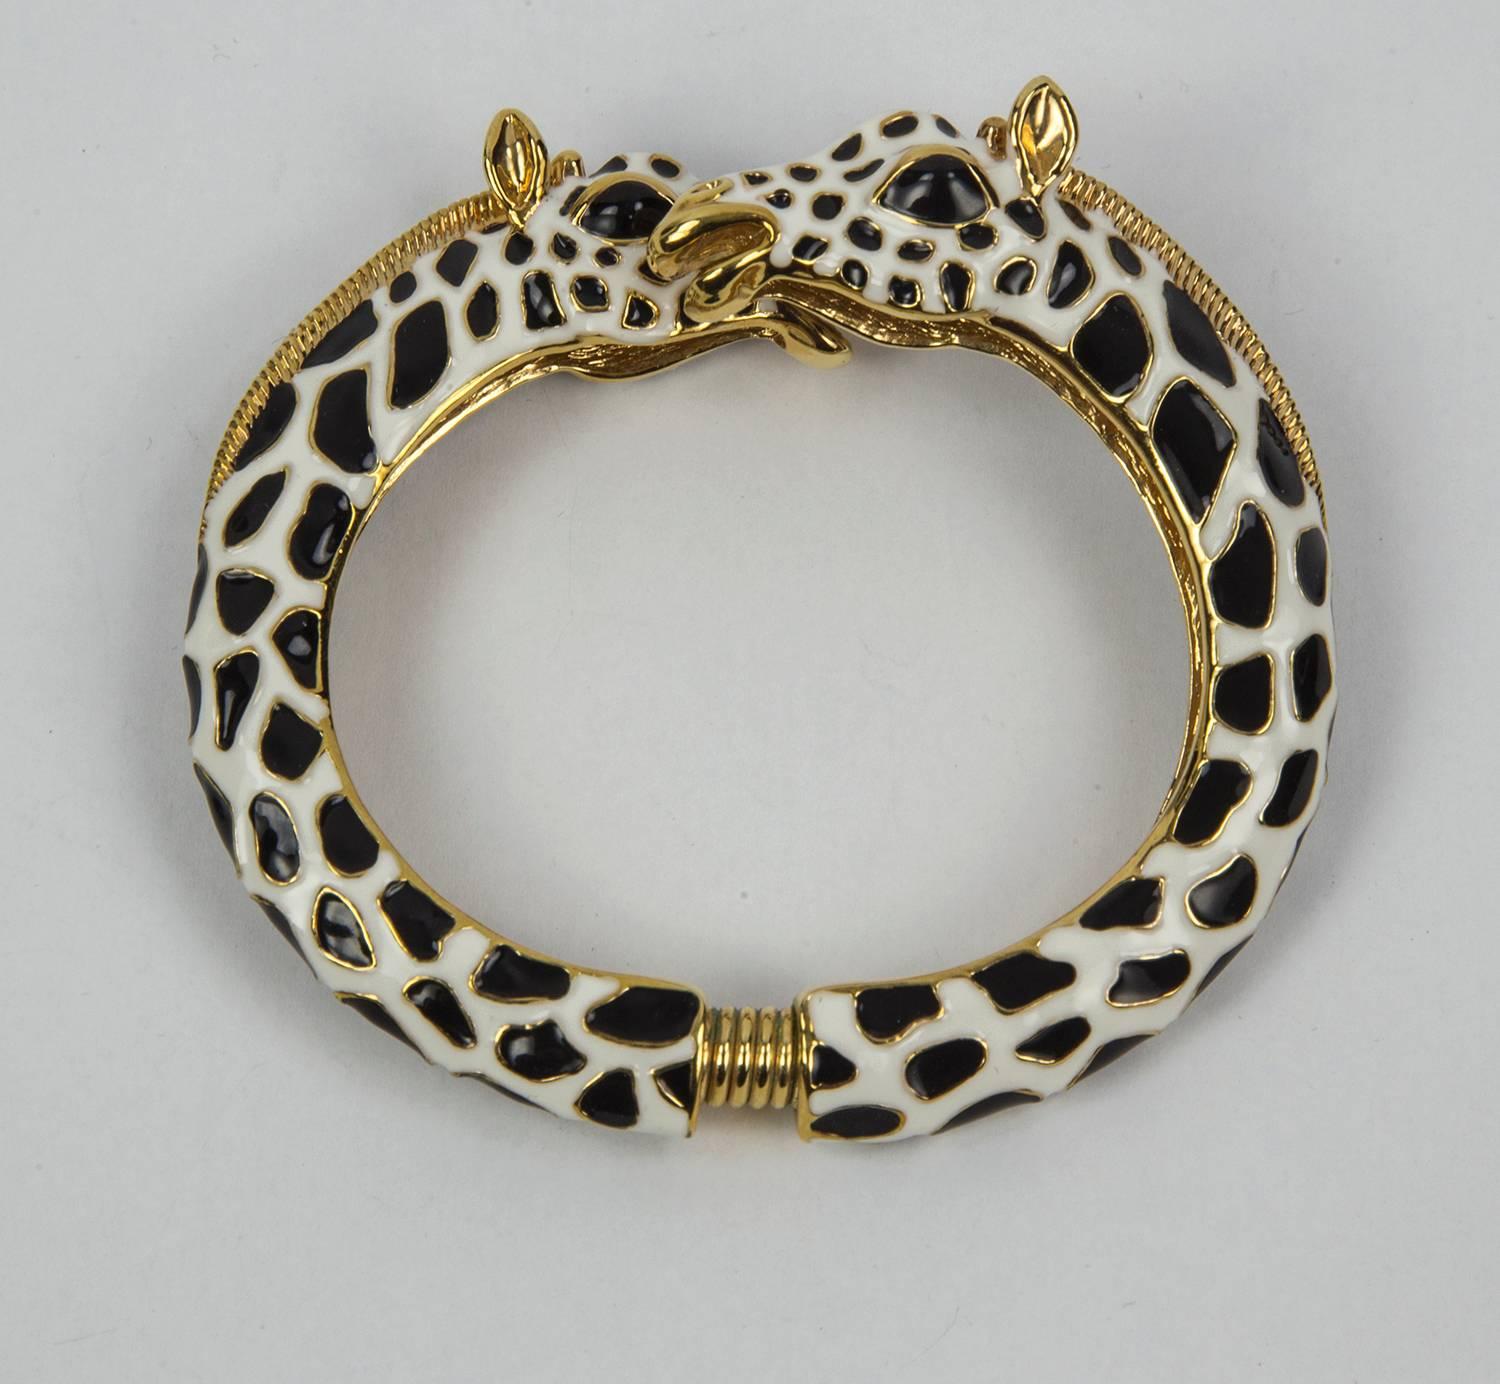 Chic Kenneth J Lane spiral Hinged Bangle Cuff Bracelet depicting two White and Black Enamel Giraffes facing each other and a co-ordinating Ring set with a Beautiful Pink CZ stone; gold tone accents; The bottom spring mechanism allows easy entry and